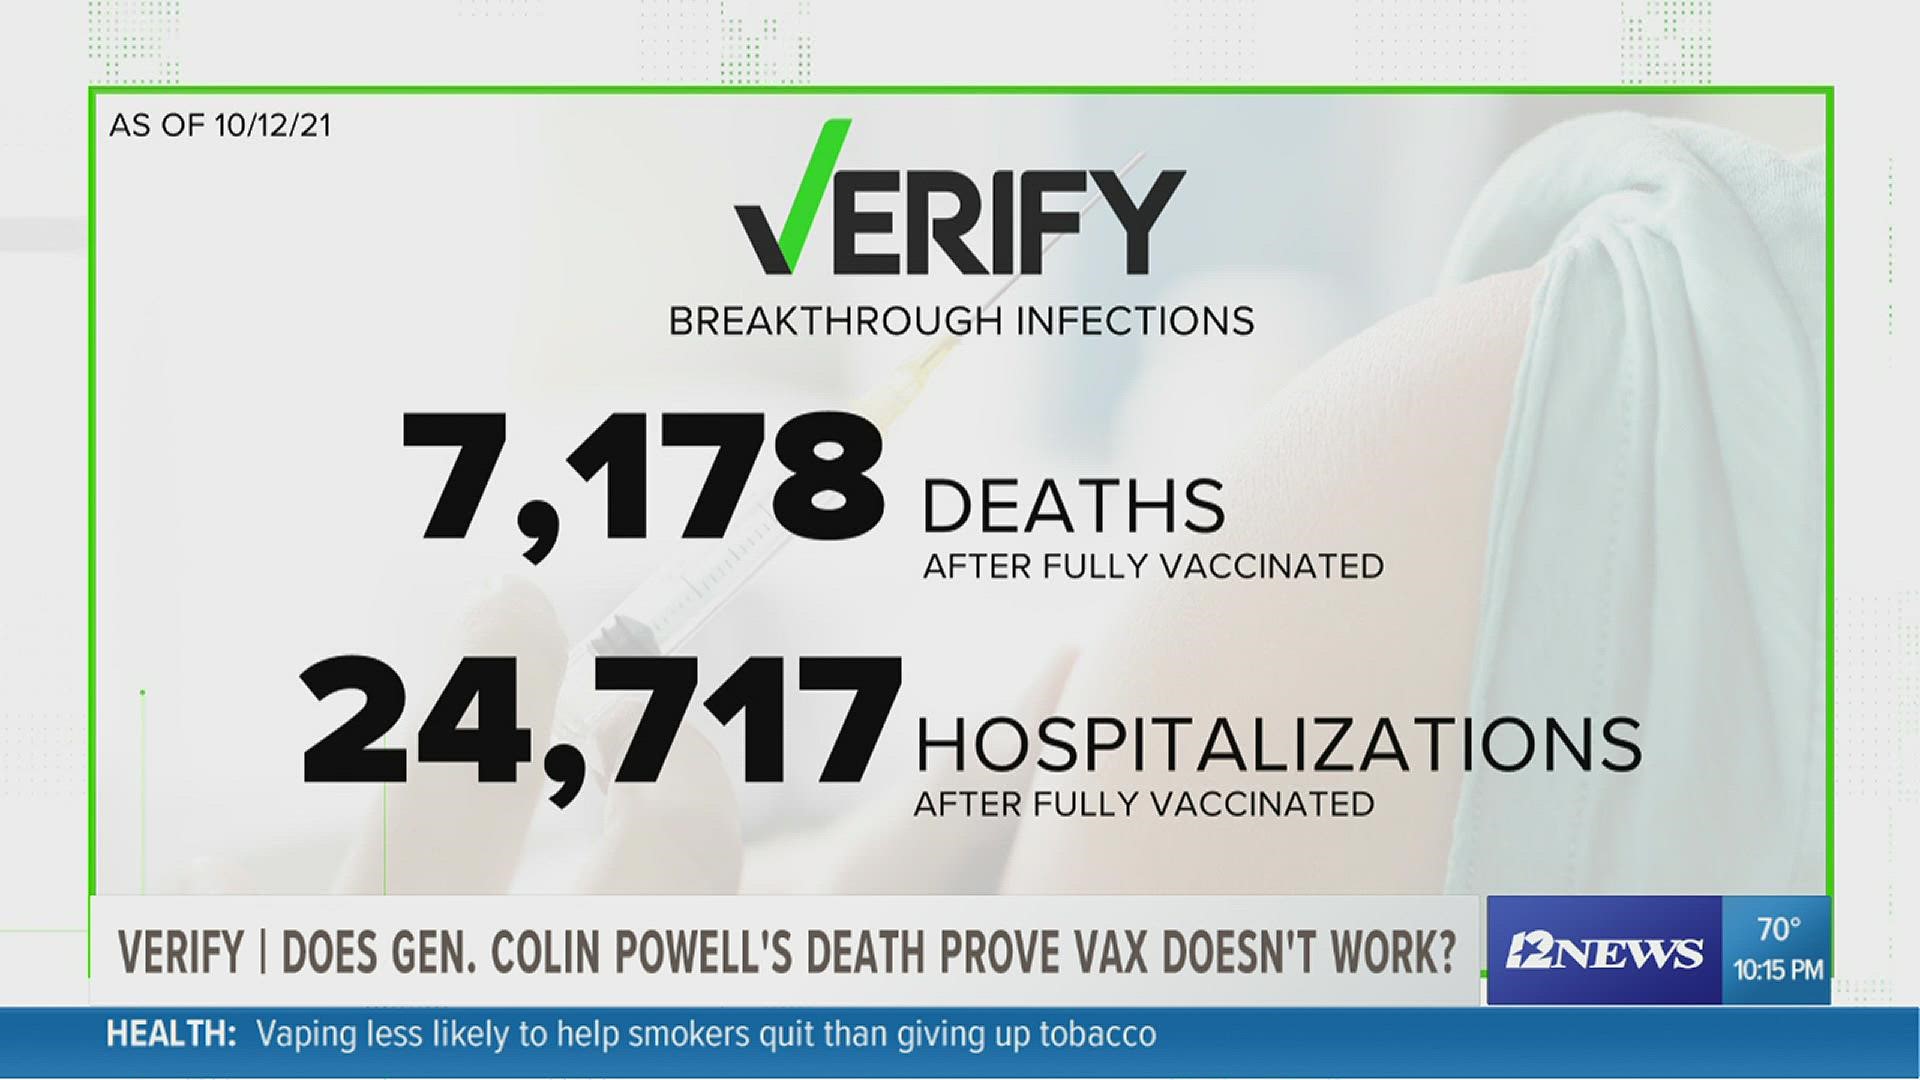 According to October data, the chances of going to the hospital is around .01% for those fully vaccinated.